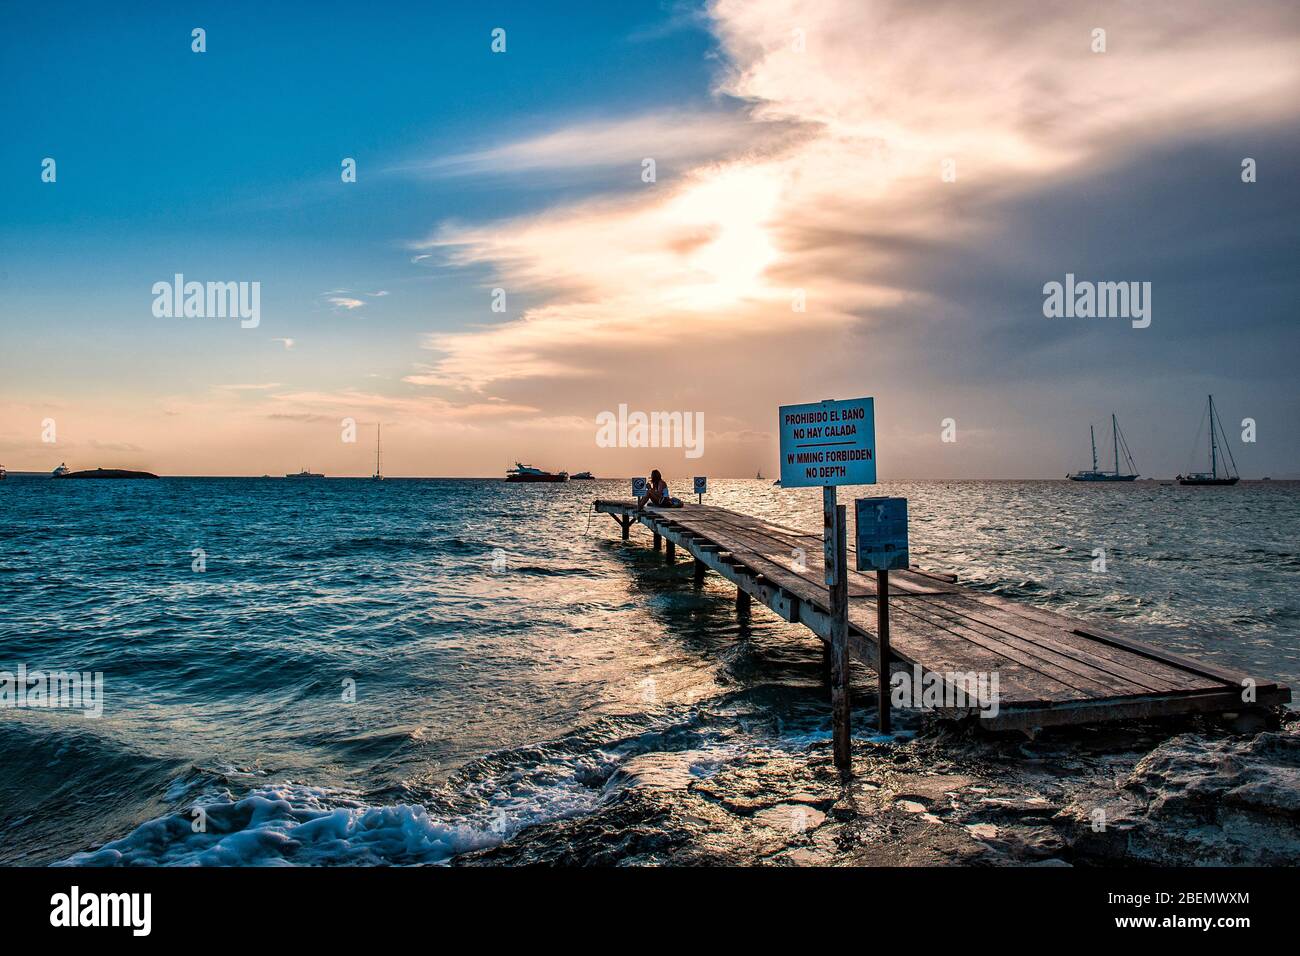 Ses Illetes Beach, Formentera, Balearic Islands, Spain. Photos at sunset of the sea walkway for mooring boats. A beautiful cloud covers the sun. Stock Photo